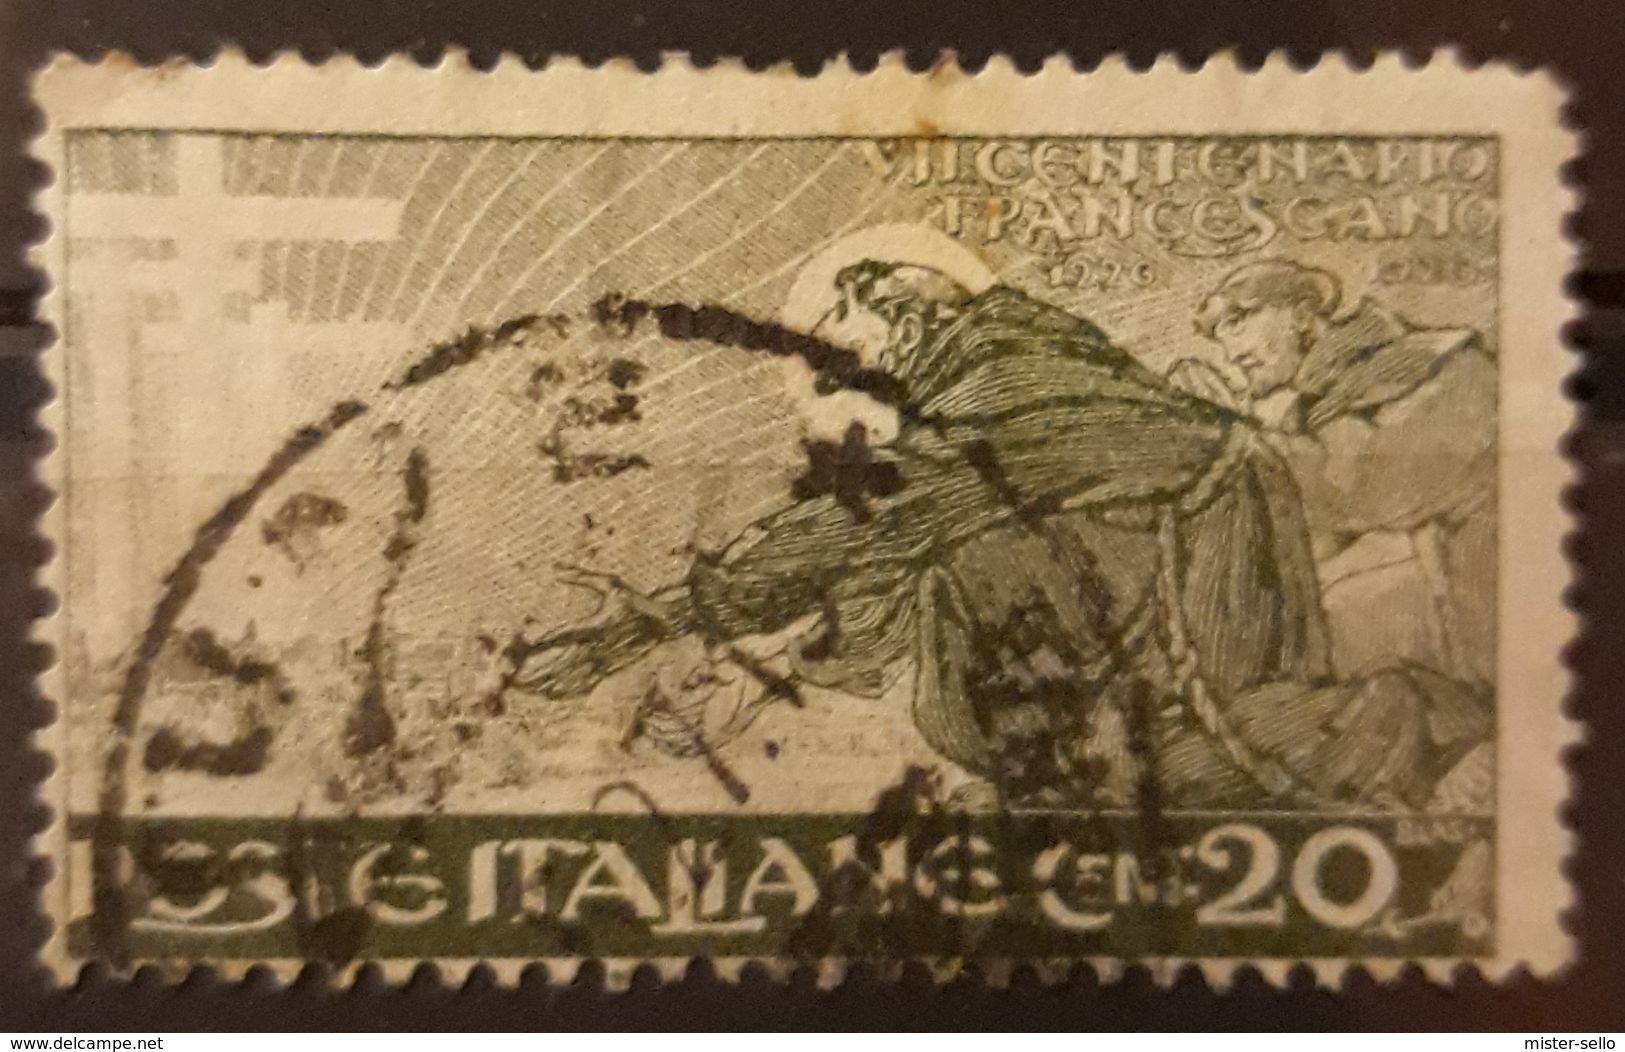 ITALIA 1926 The 700th Anniversary Of The Death Of St. Francis Of Assisi. USADO - USED. - Usados